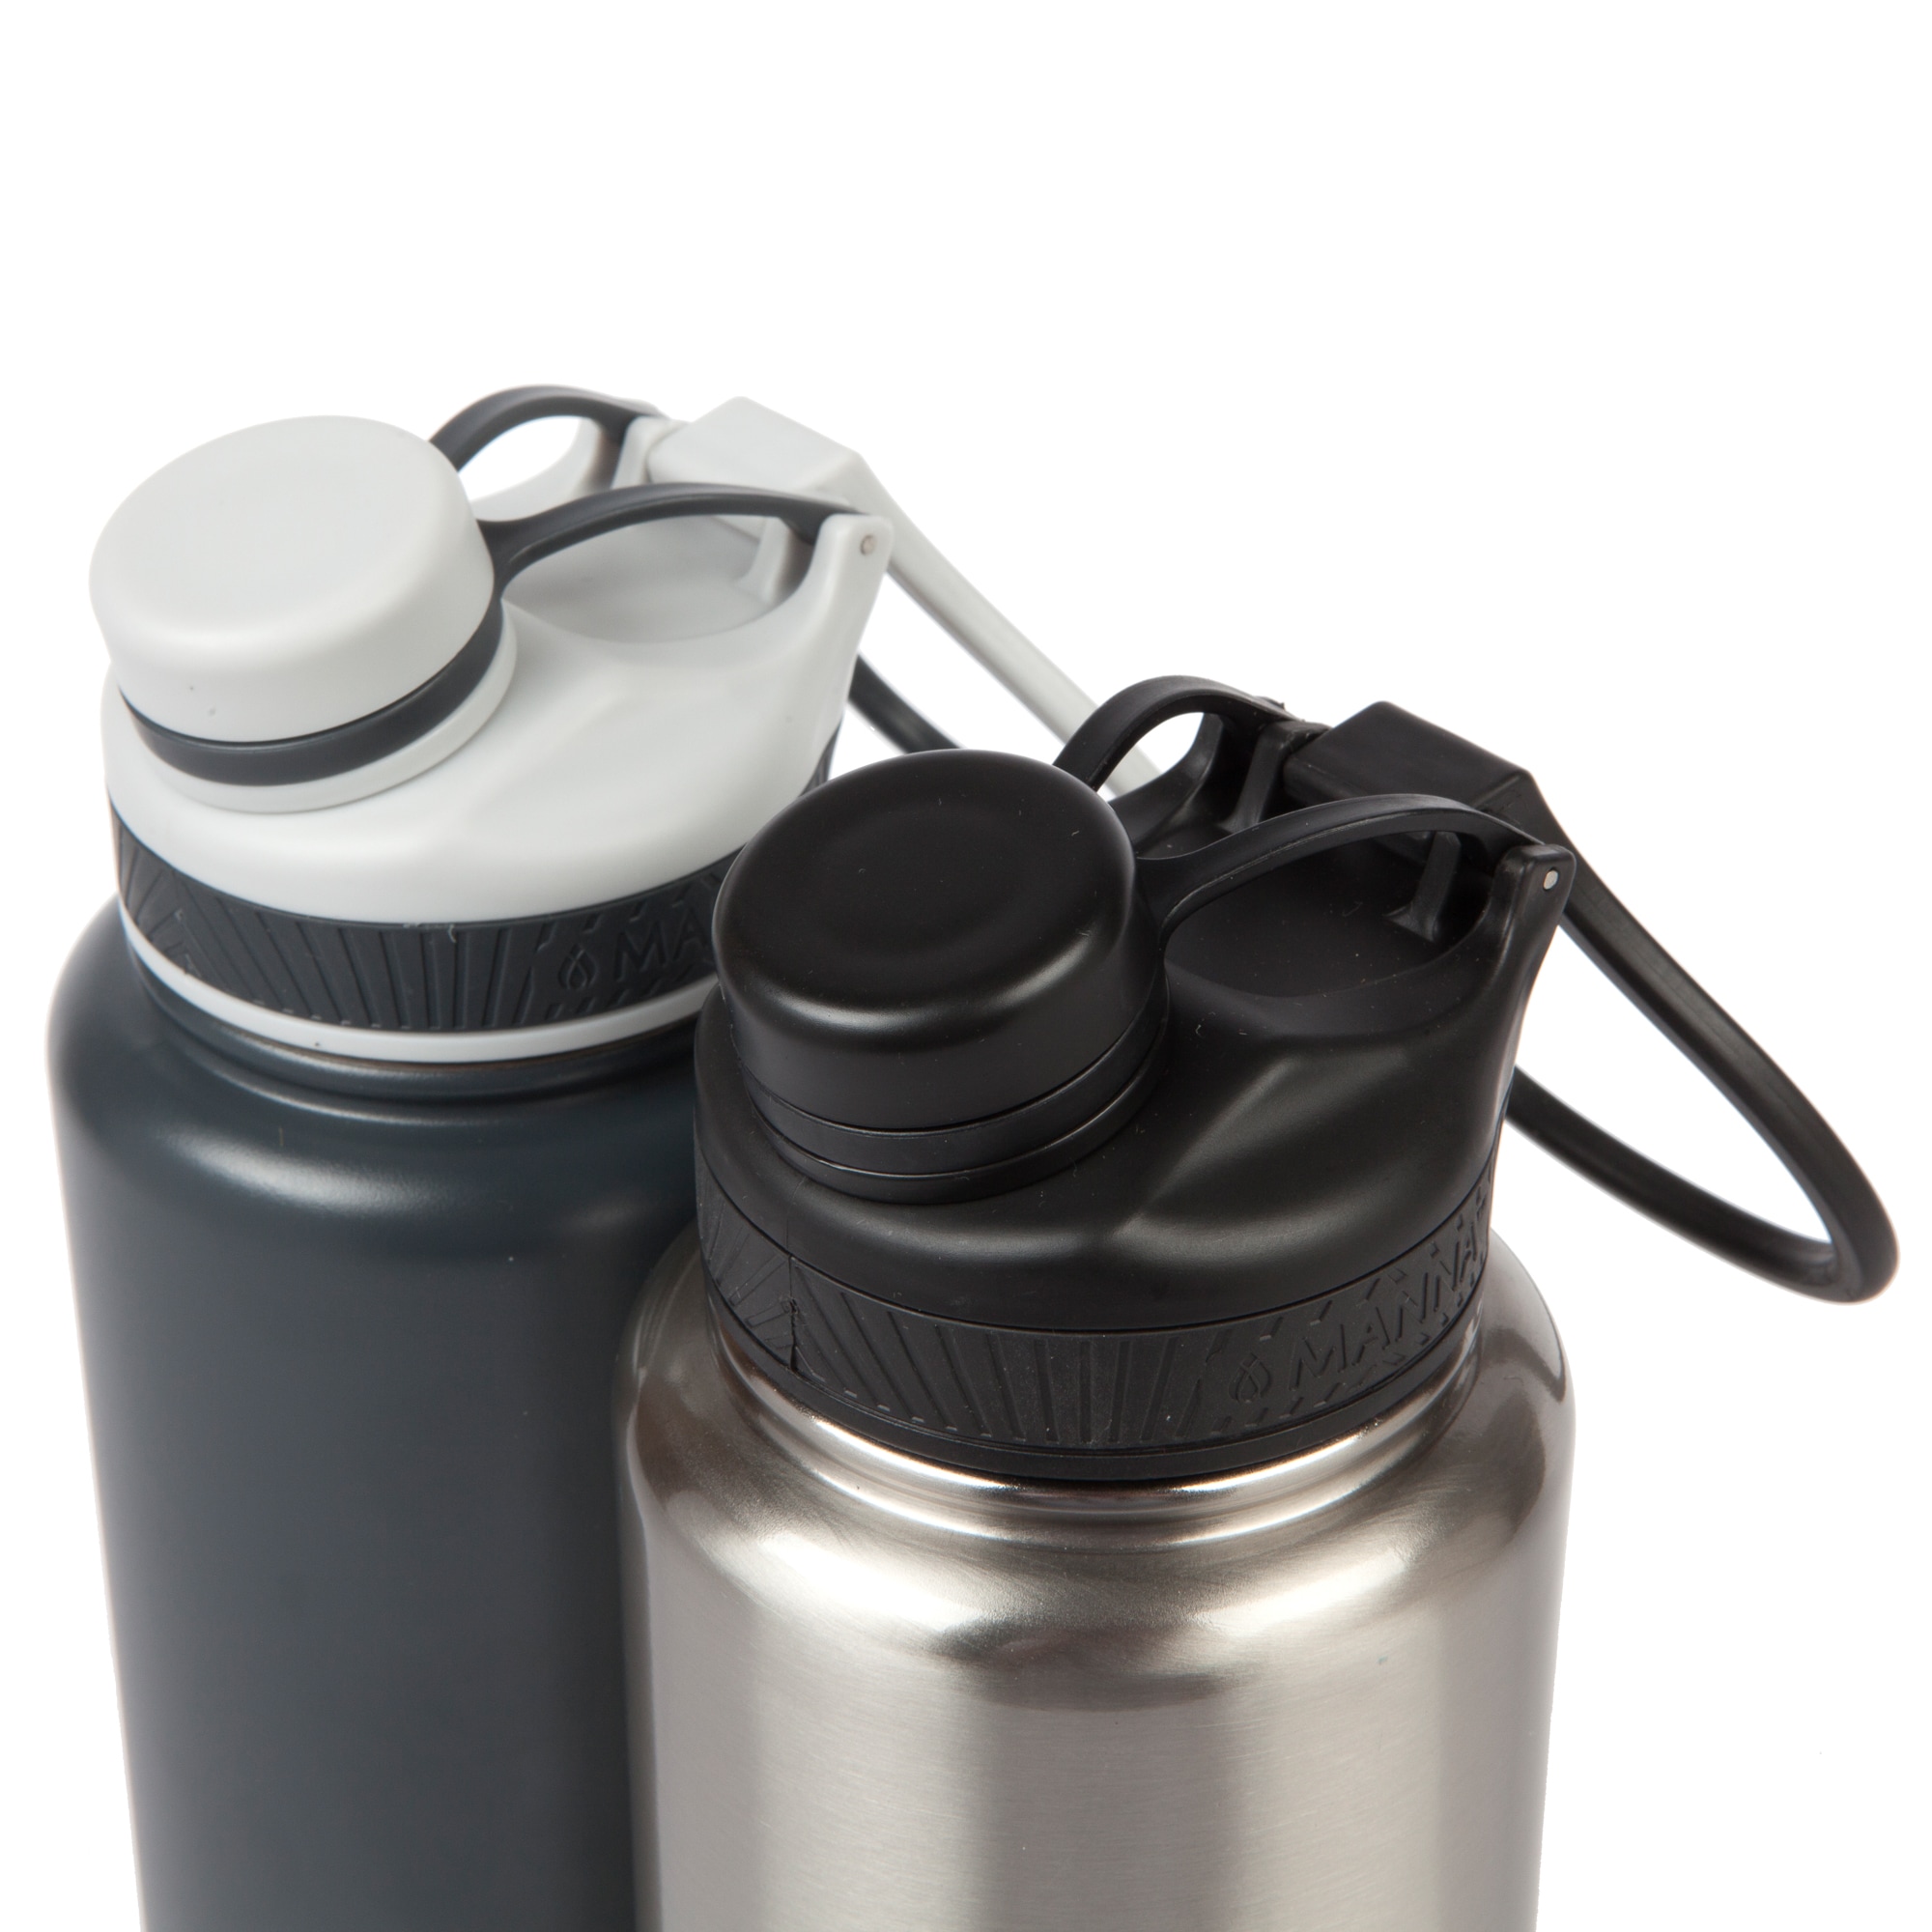 Manna 40-fl oz Stainless Steel Insulated Water Bottle (2-Pack) at